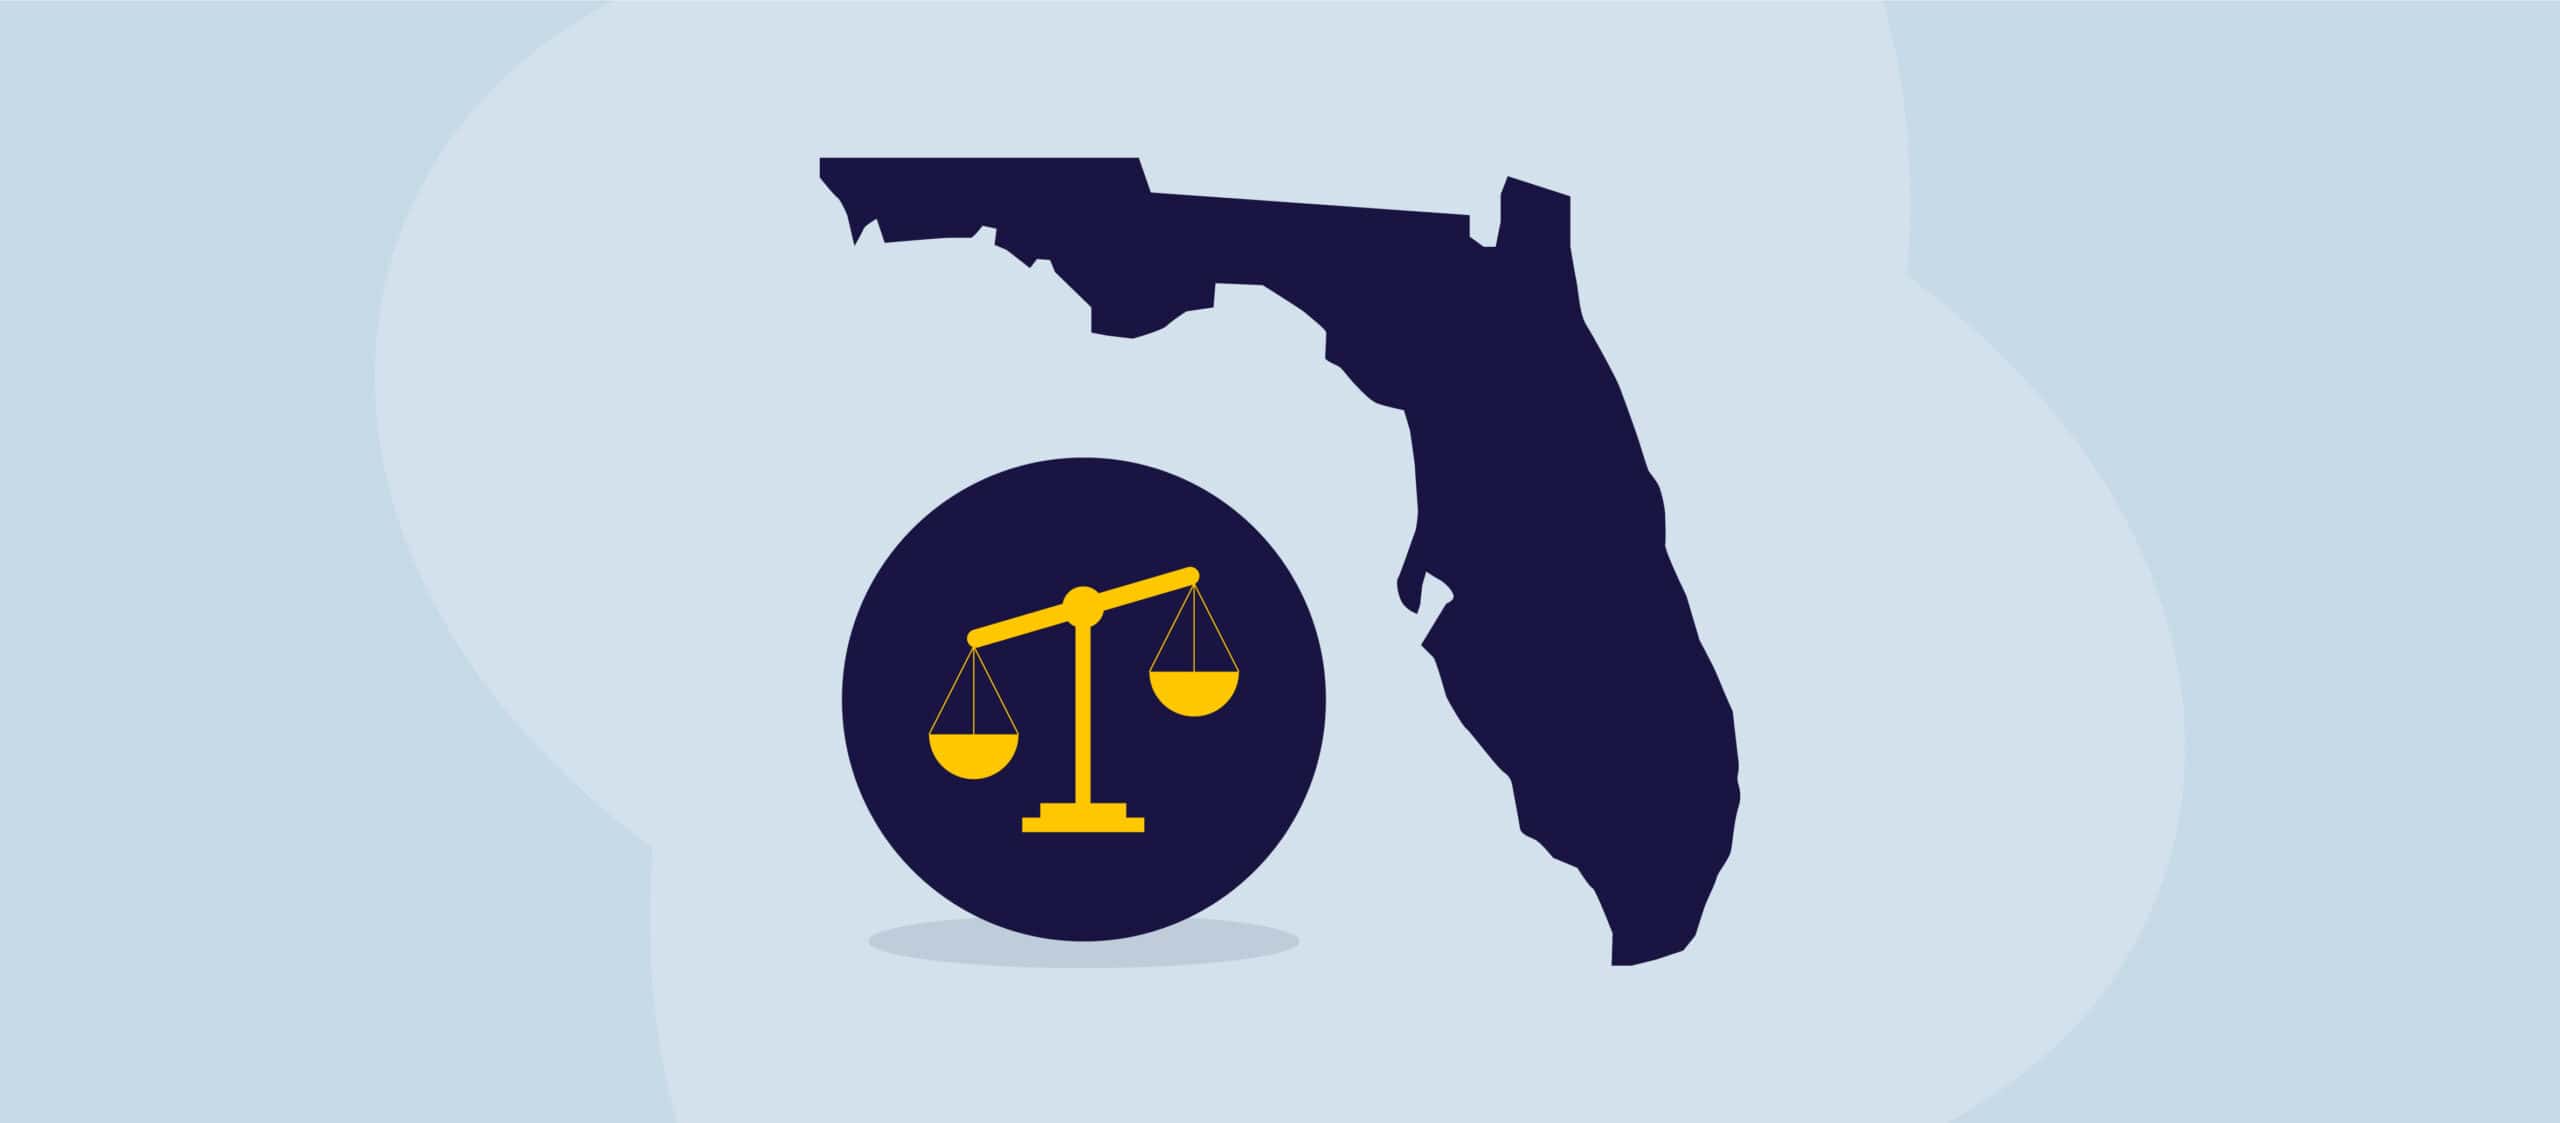 An illustration featuring the scales of justice and the state of Florida.